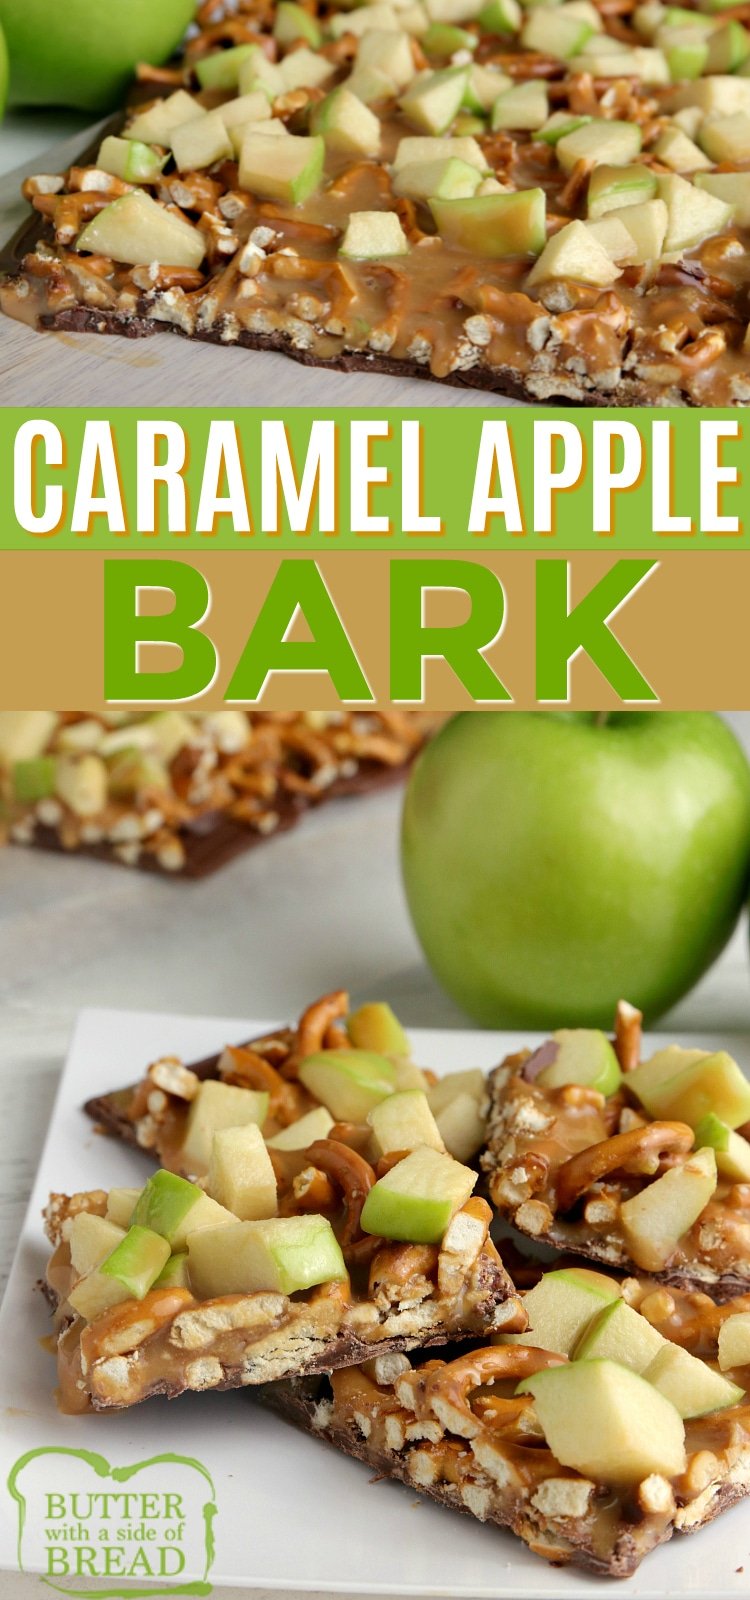 Caramel Apple Bark made with milk chocolate, pretzels, caramel and apples. Only four ingredients to make this simple dessert!